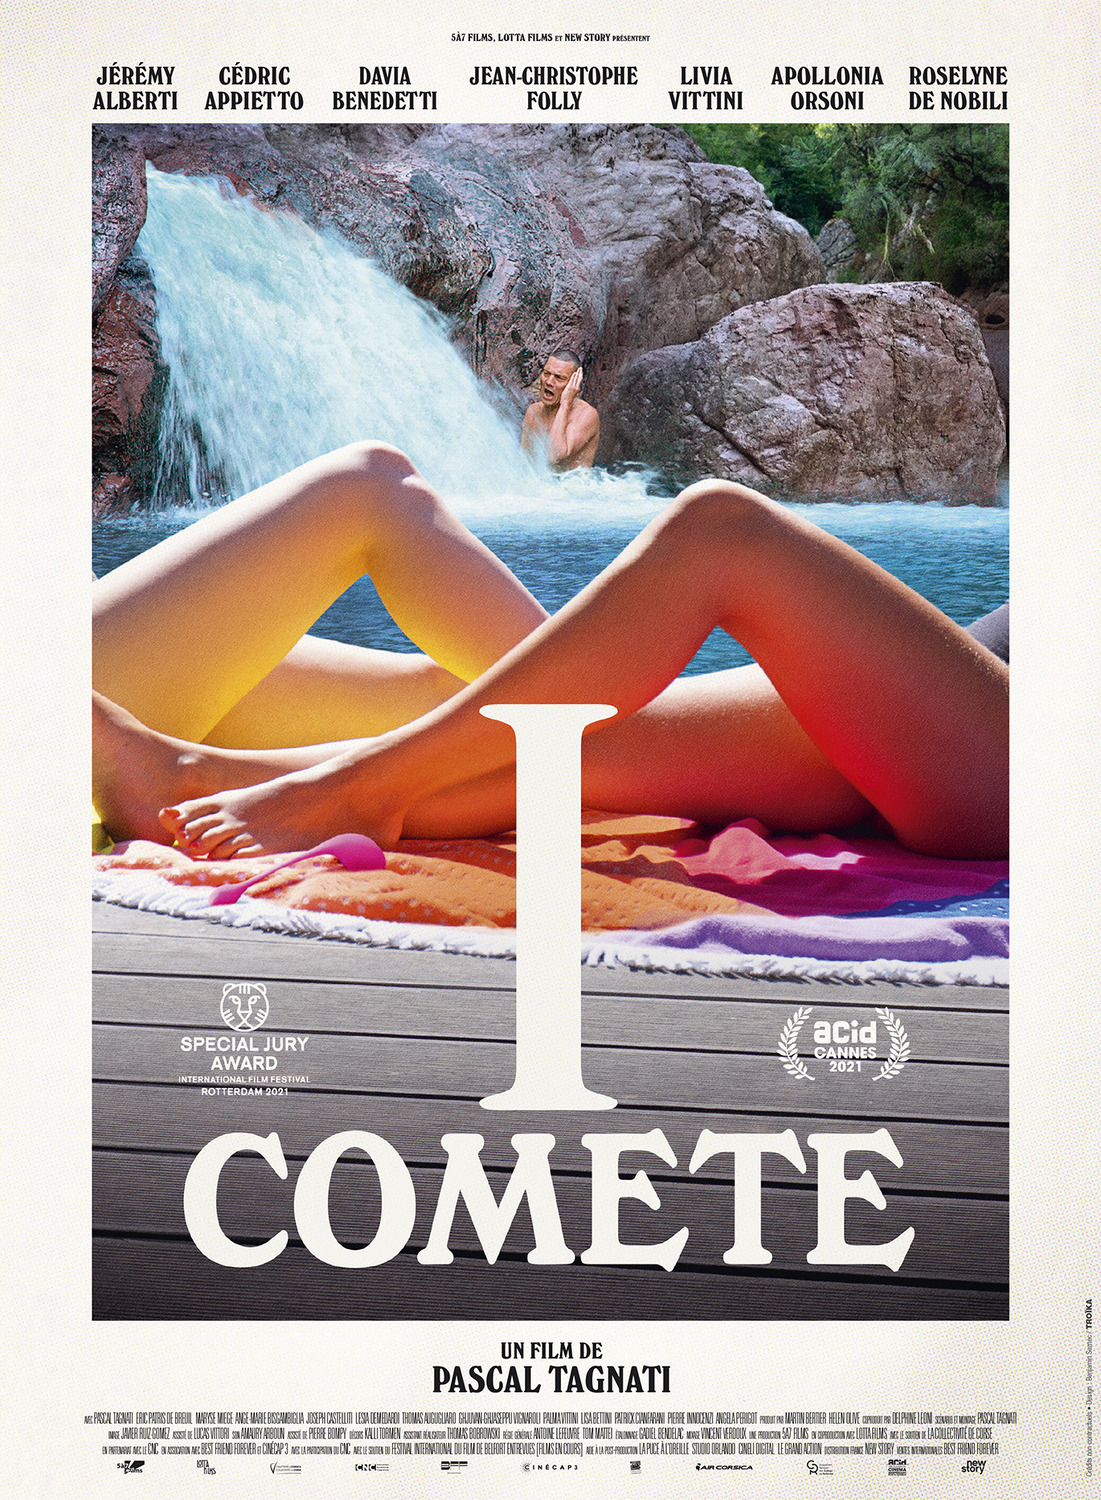 Extra Large Movie Poster Image for I comete (#1 of 2)